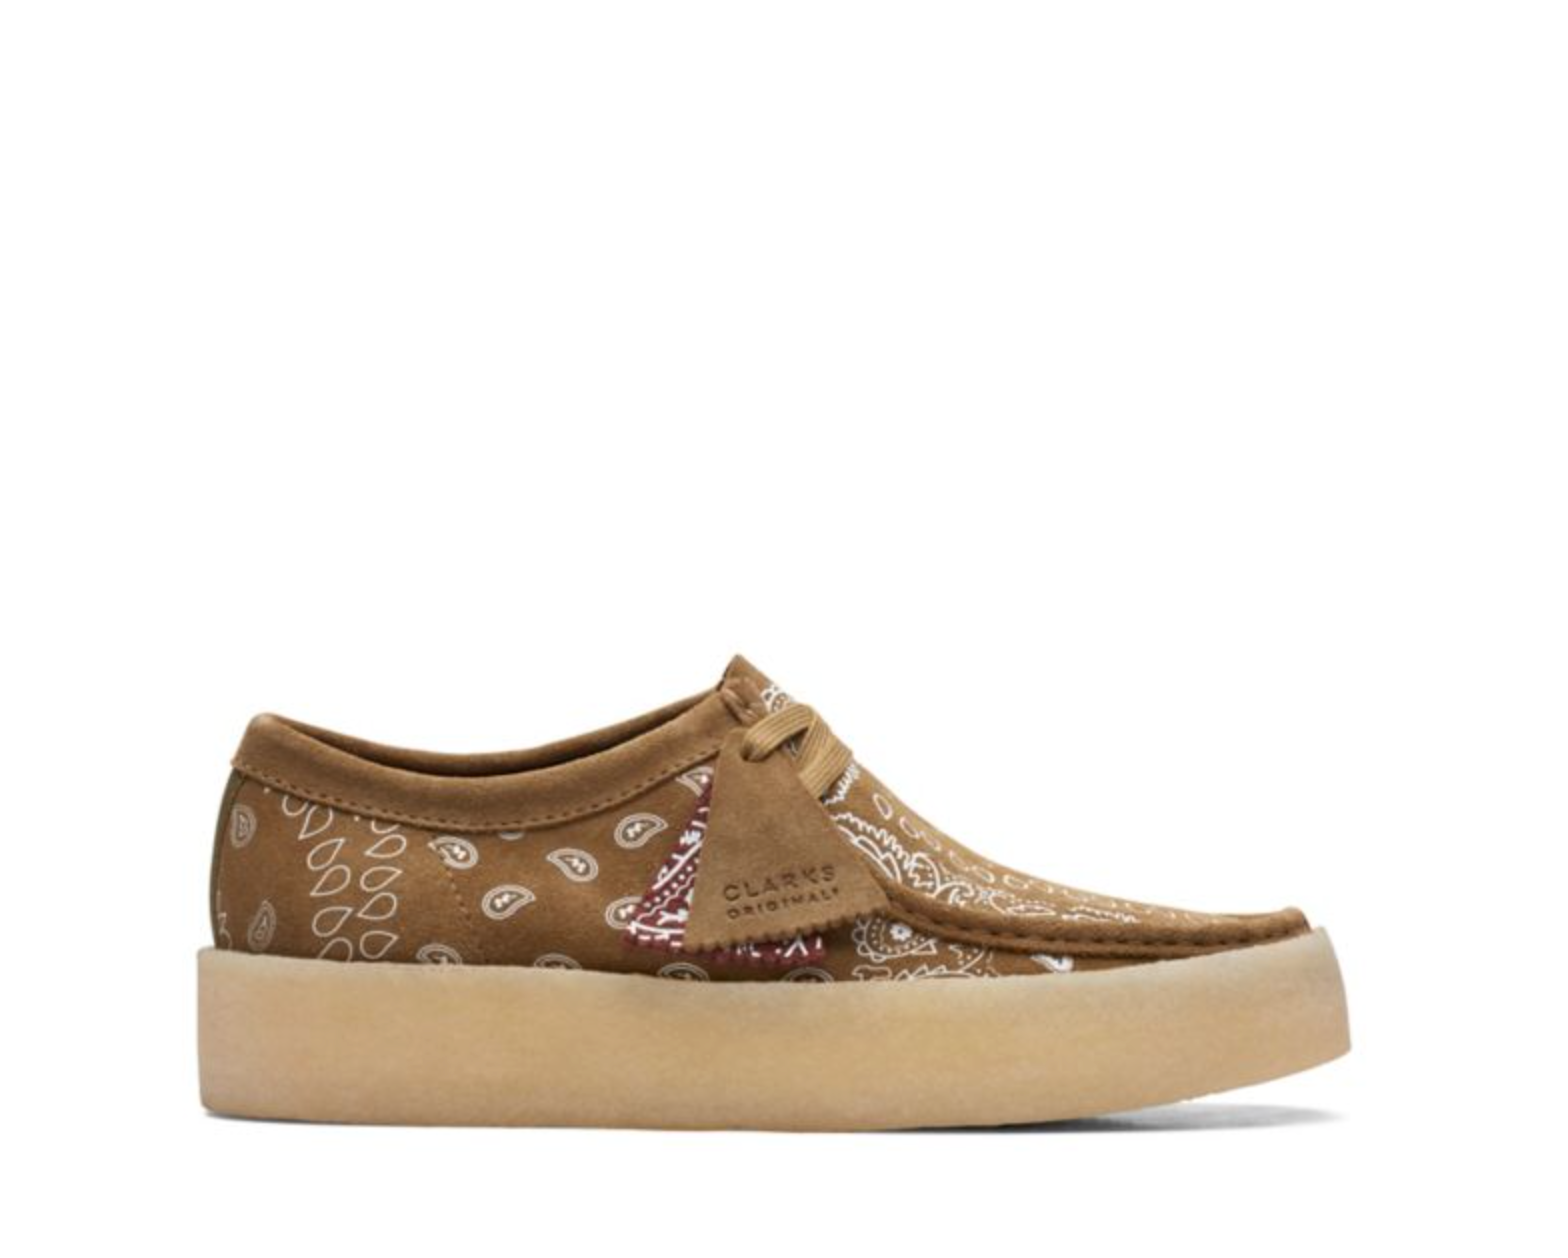 Clarks Wallabee Cup Sole Dark Olive Paisley Print